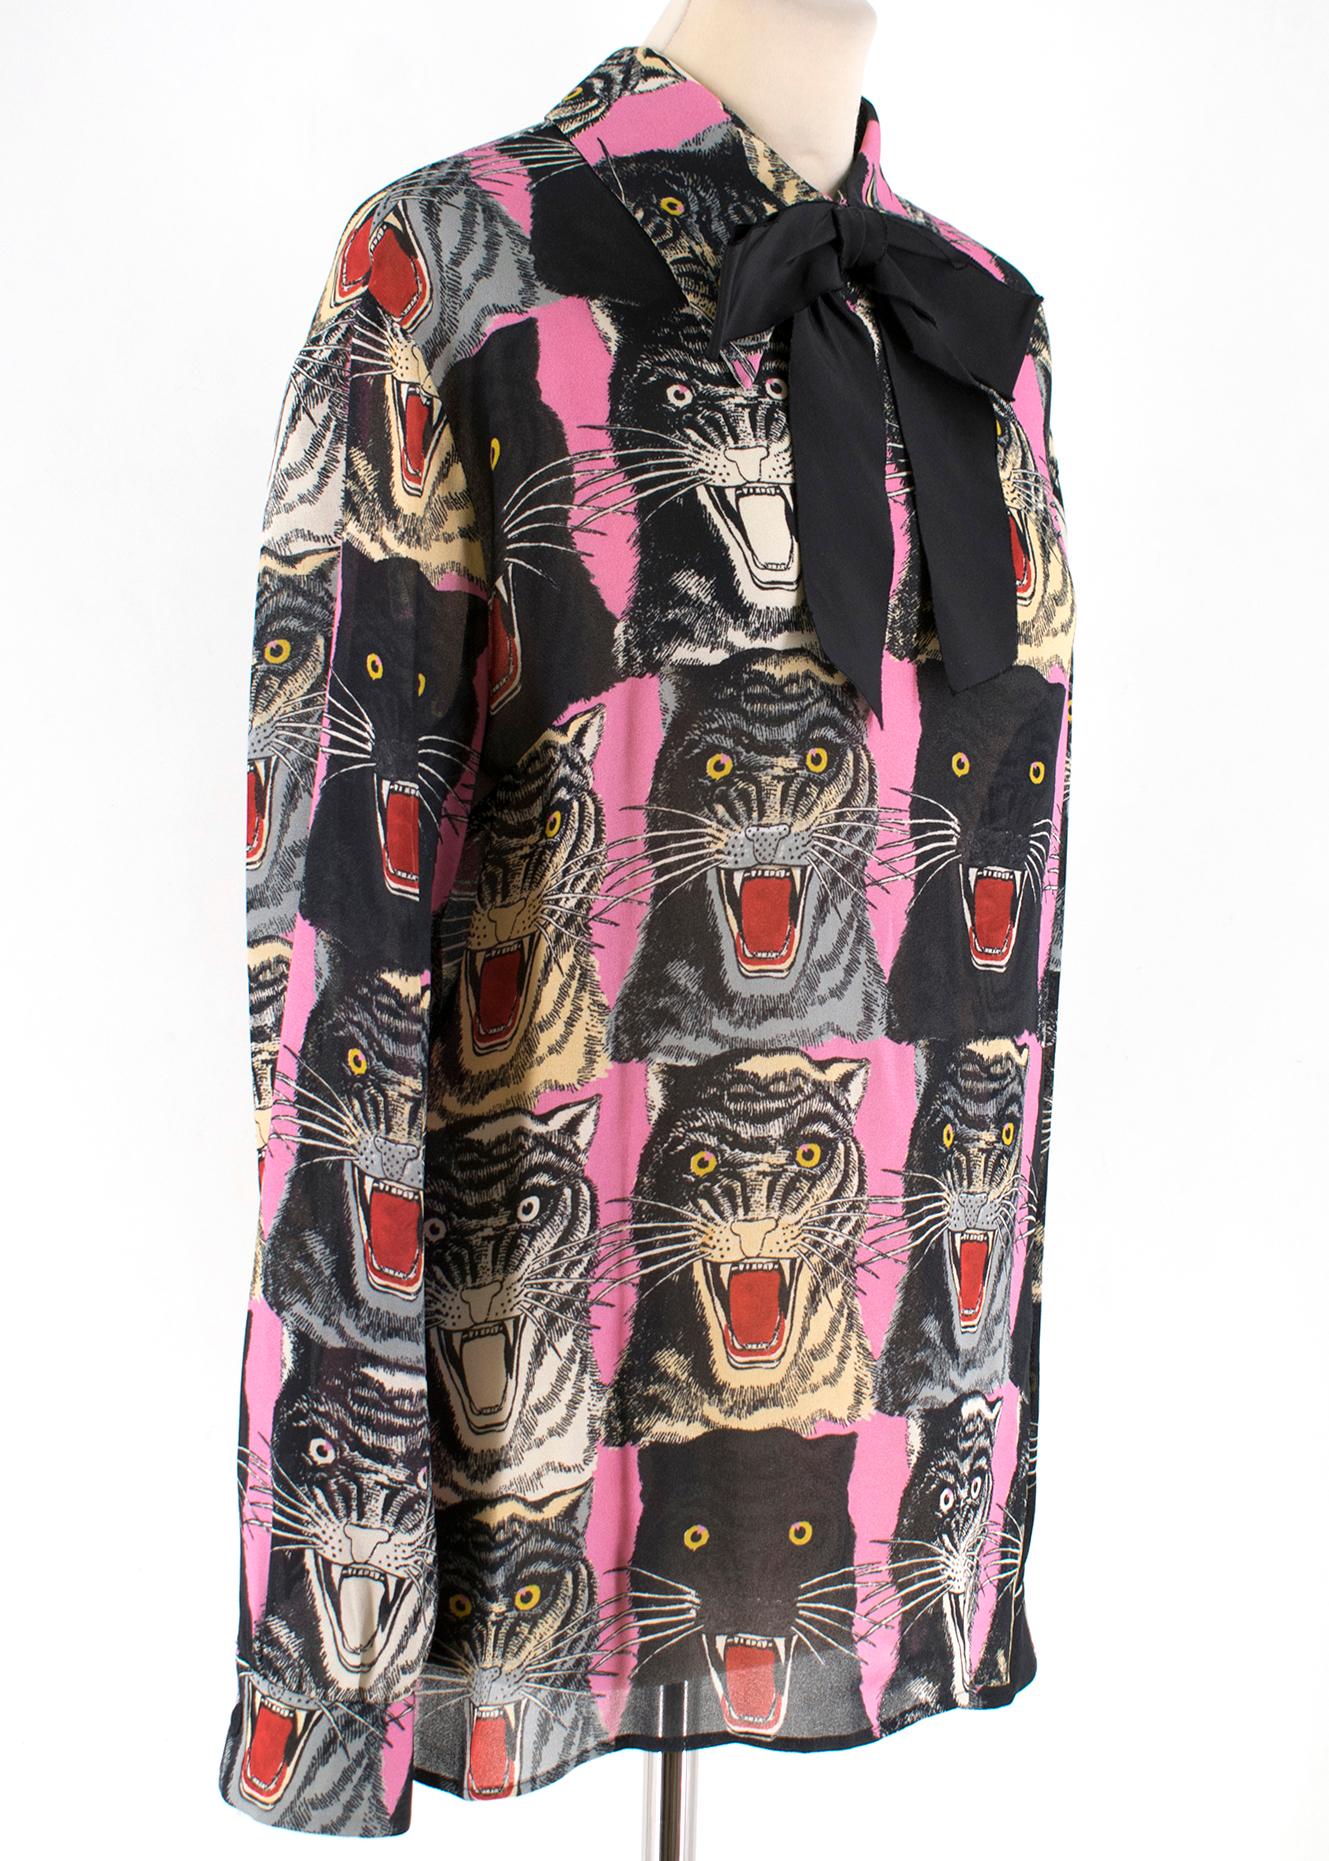 Gucci Tiger Face Print Sable Shirt

- Black Neck Bow 
- Back Button Down Detail 
- Buttoned Cuffs
- Straight Hemline 
- Repetitive Tiger Face Print 

100% Viscose 
Details 
100% Silk 

Remove the Bow Before Washing 

Dry Clean Only 

Made in